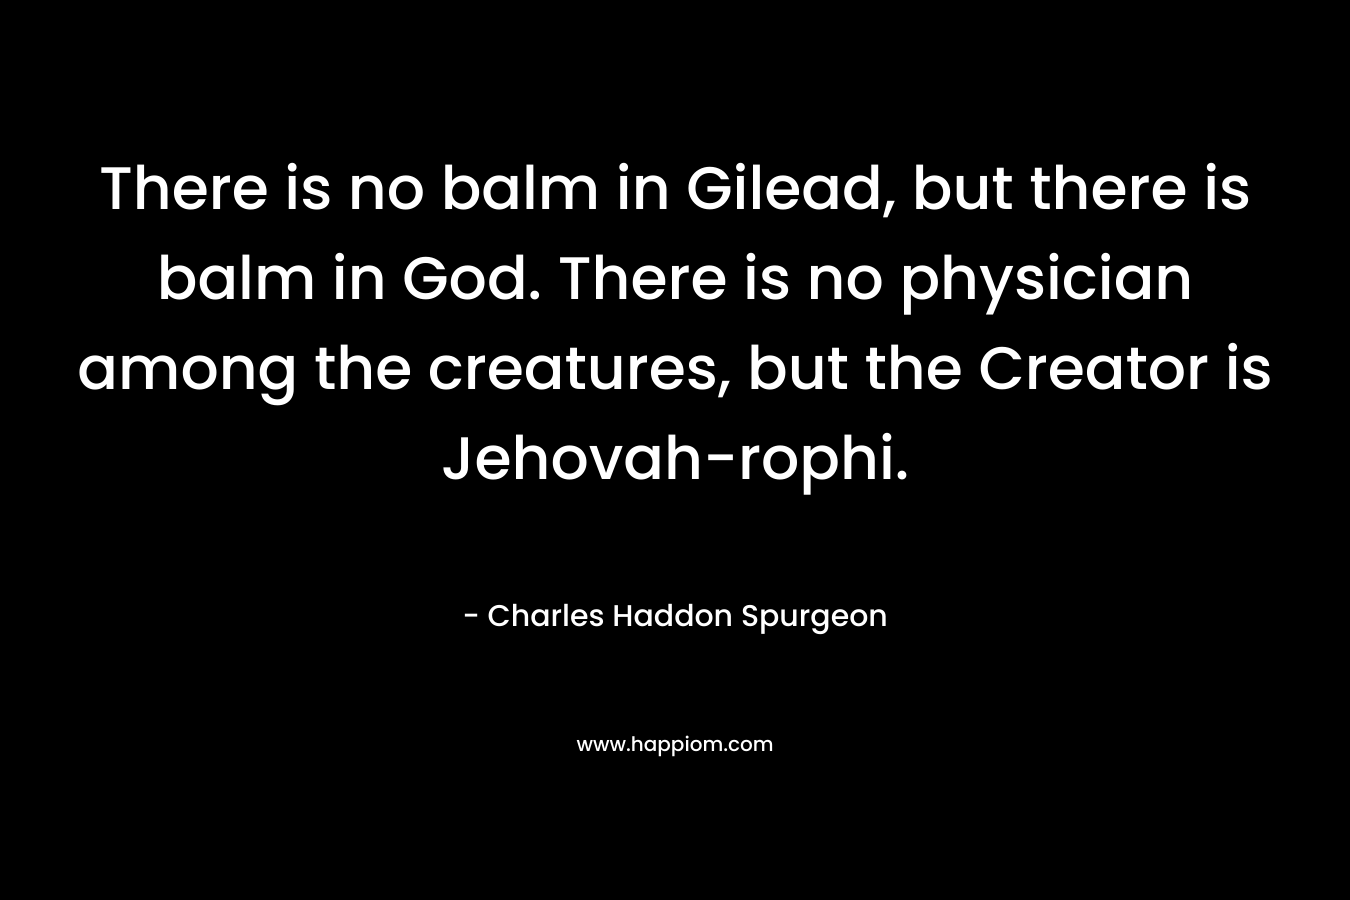 There is no balm in Gilead, but there is balm in God. There is no physician among the creatures, but the Creator is Jehovah-rophi. – Charles Haddon Spurgeon